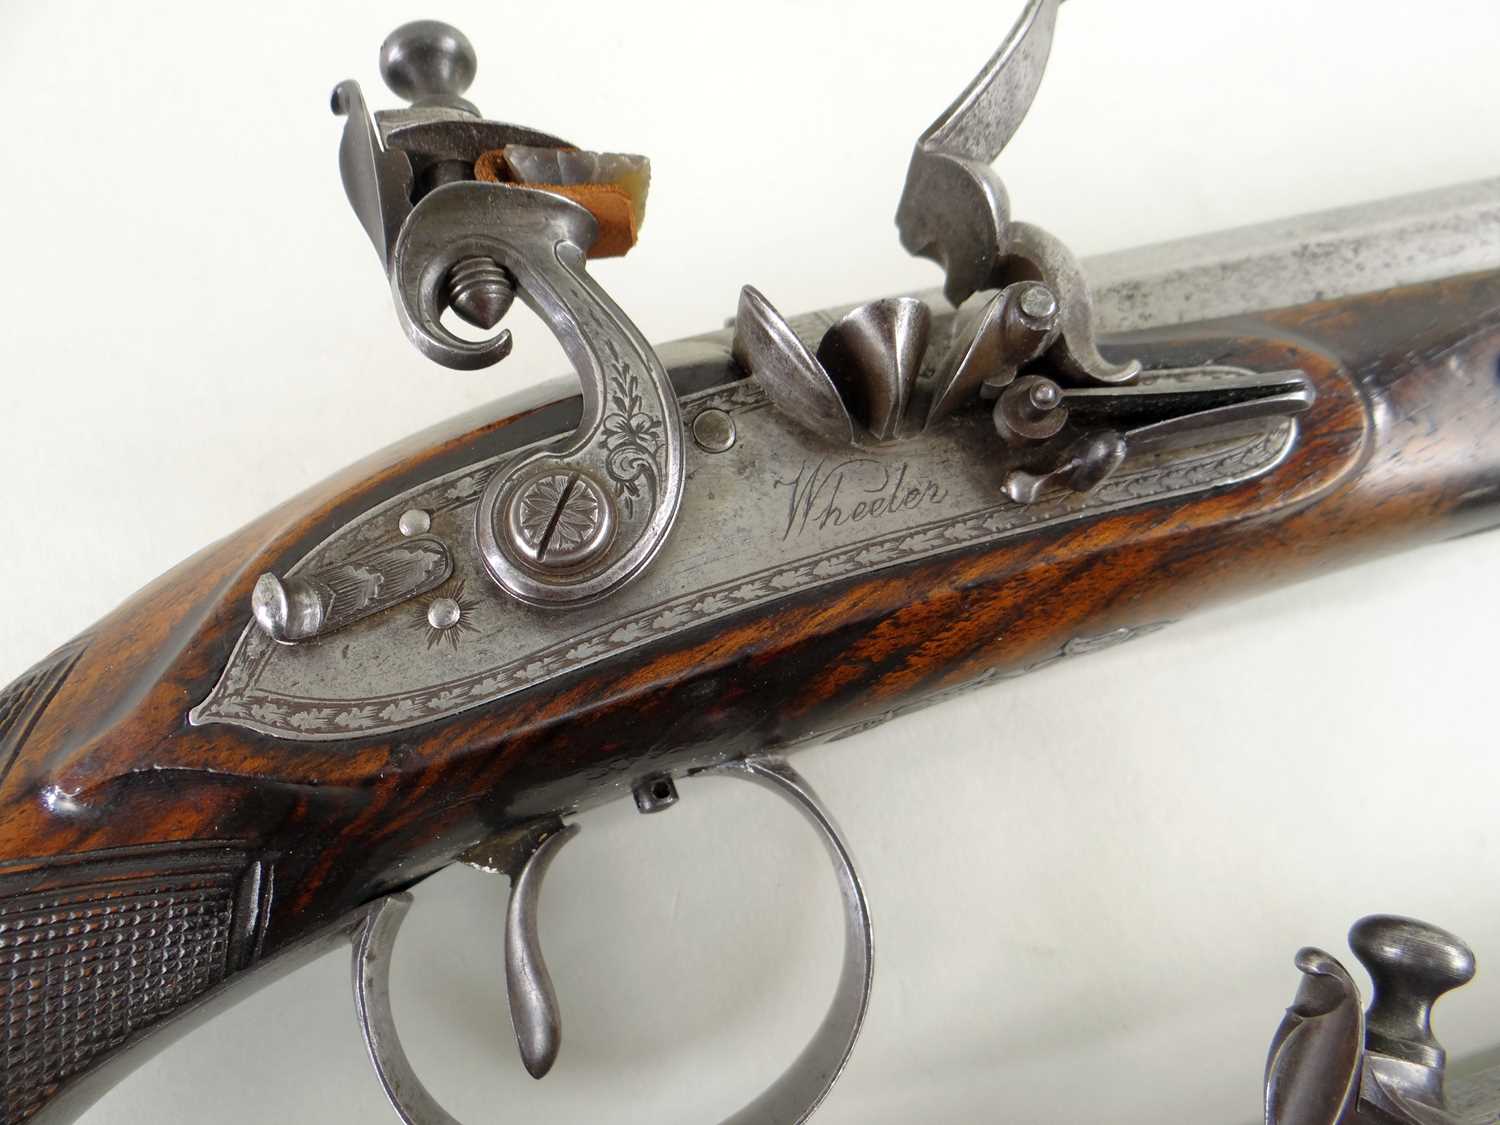 PAIR OF FLINTLOCK DUELLING PISTOLS BY WHEELER, early 19th Century - Image 2 of 14